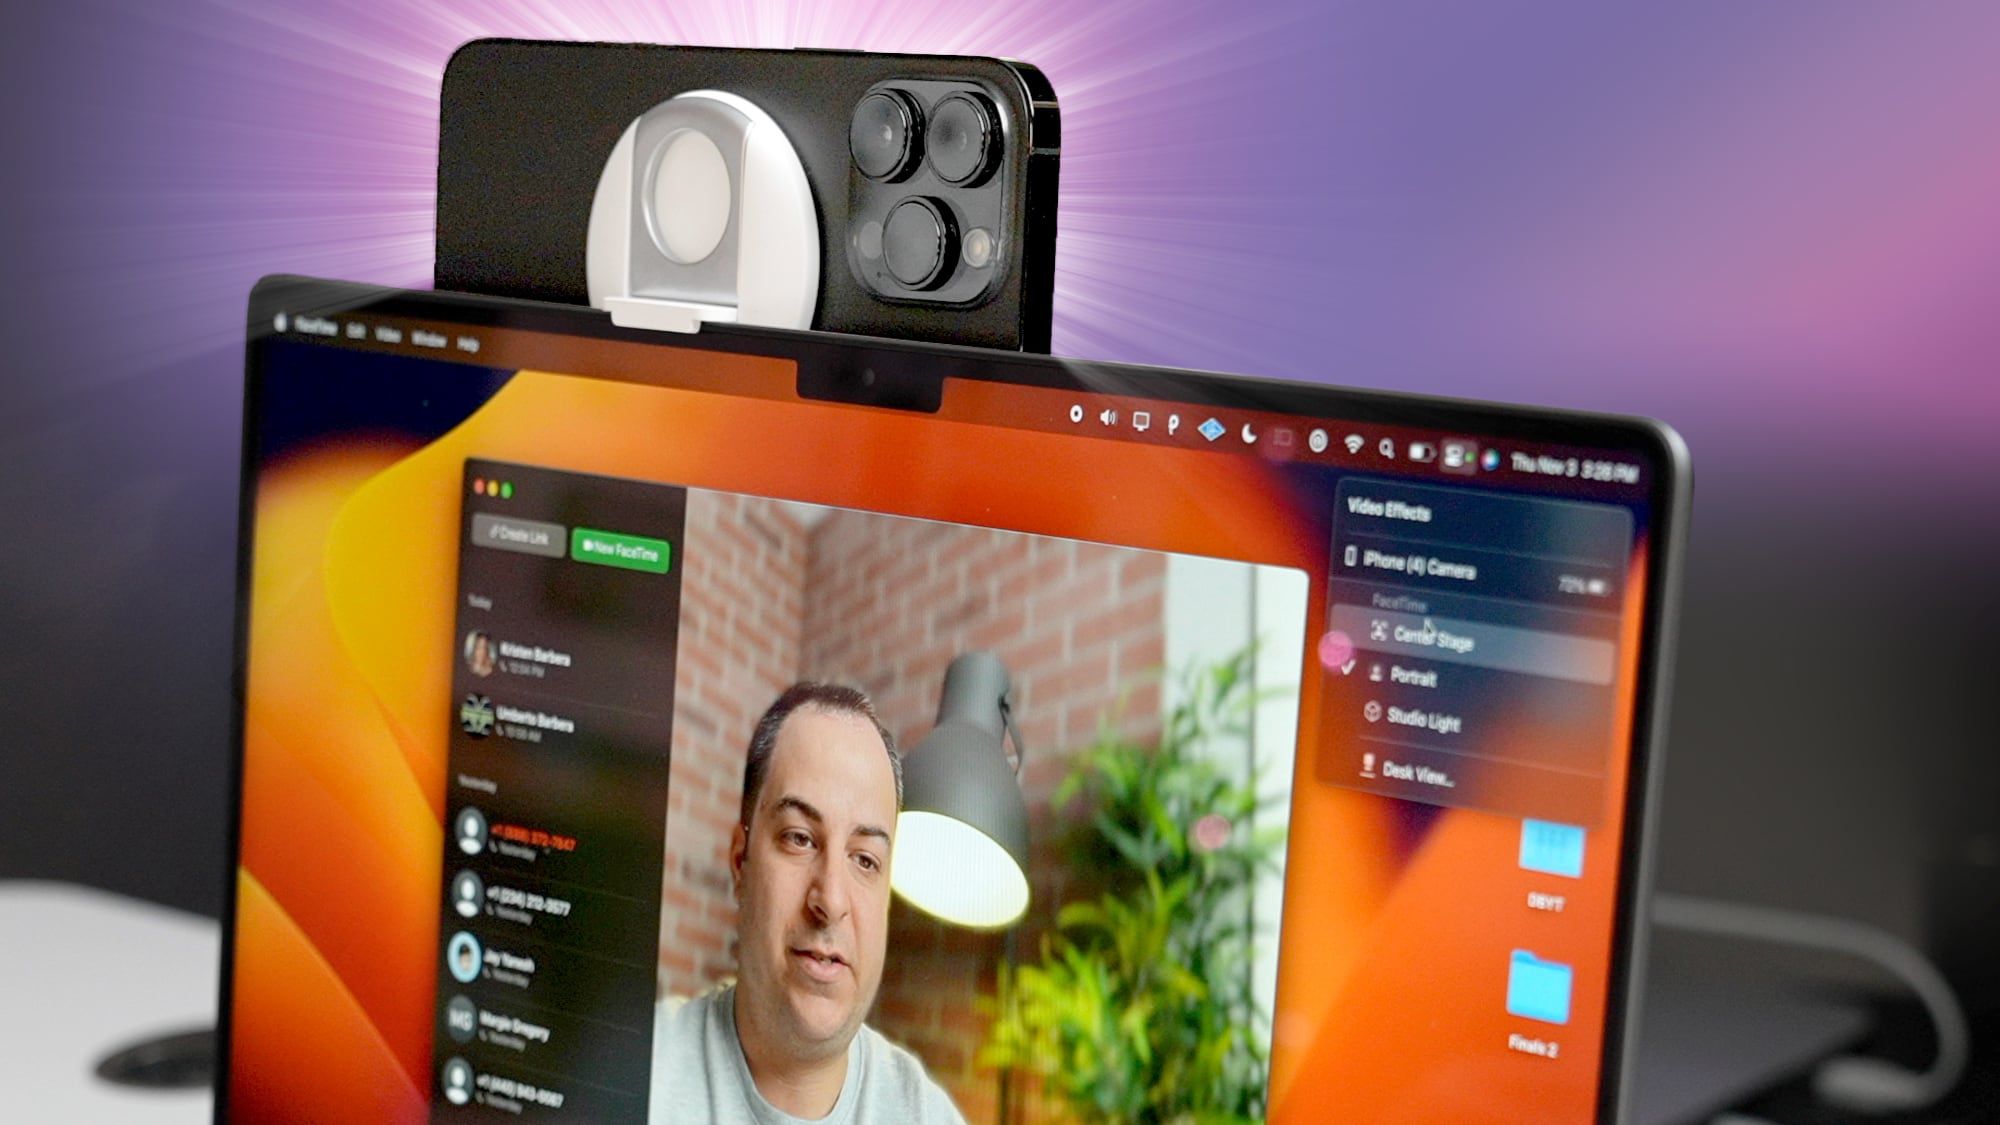 Video: Testing Continuity Camera With Belkin's iPhone MagSafe Mount - macrumors.com